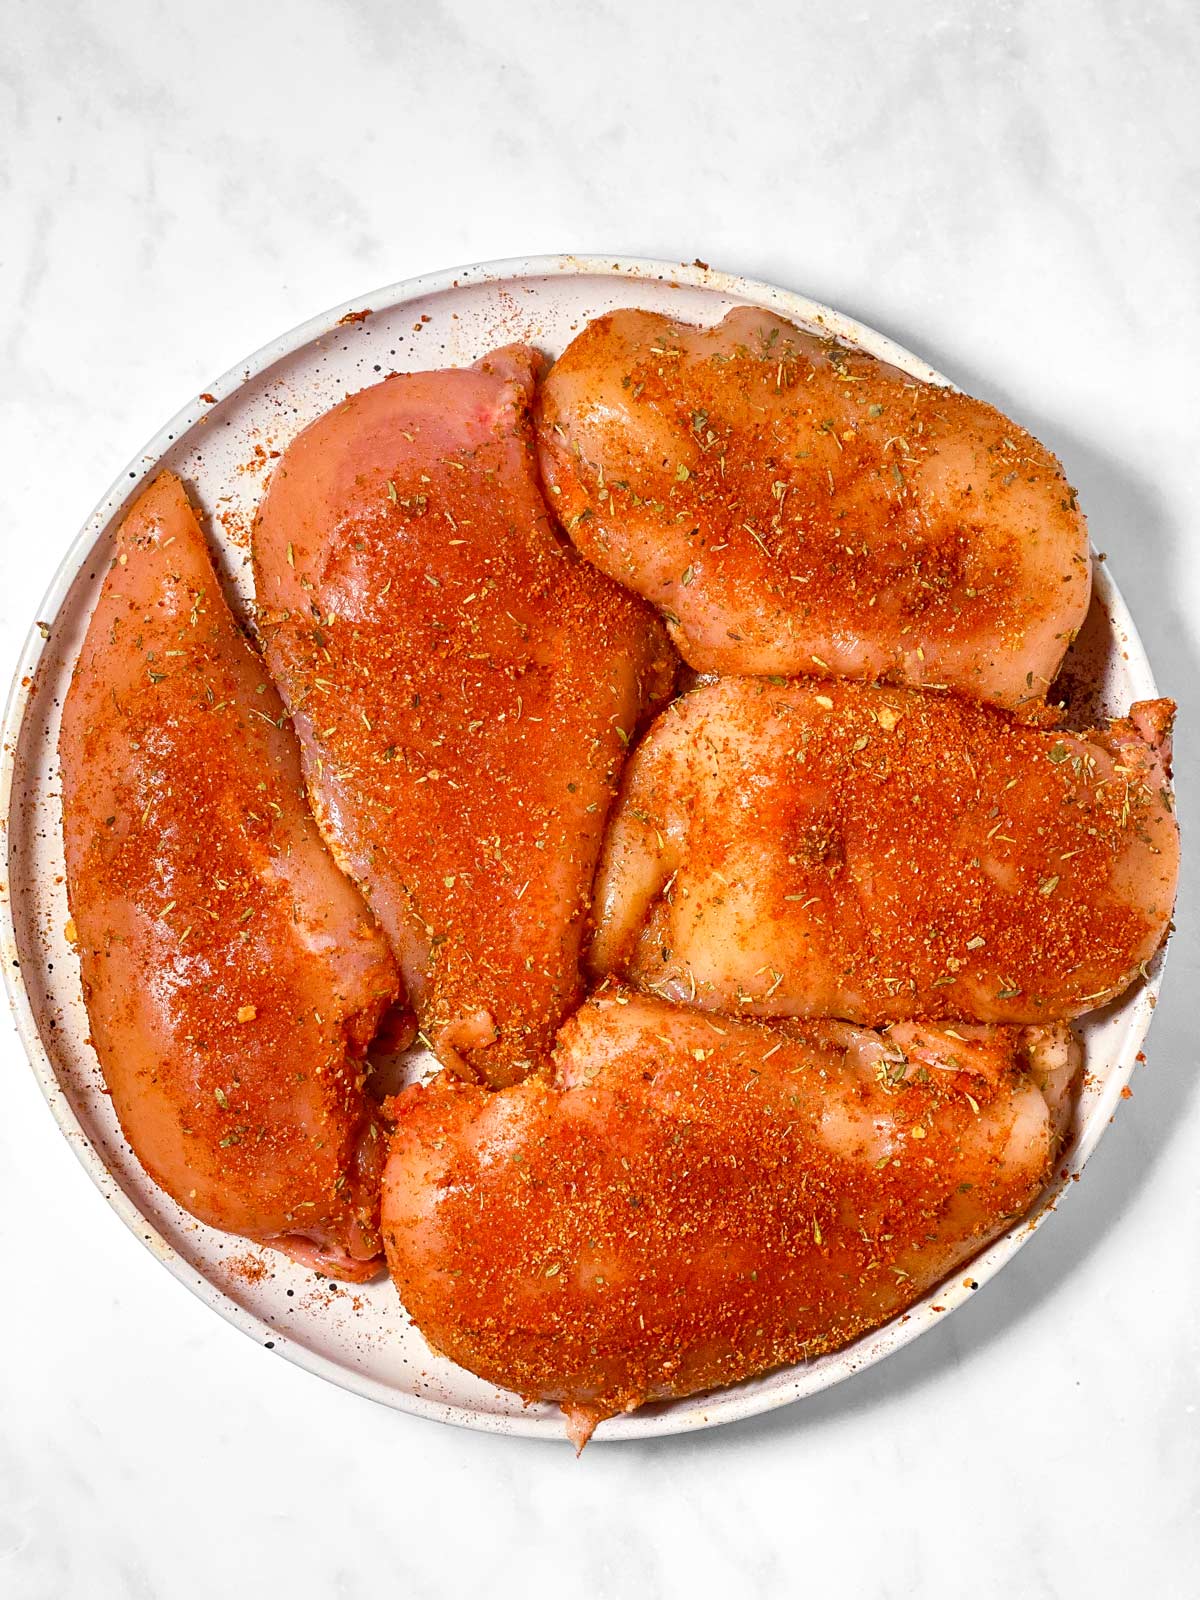 five raw, seasoned chicken breasts on white plate